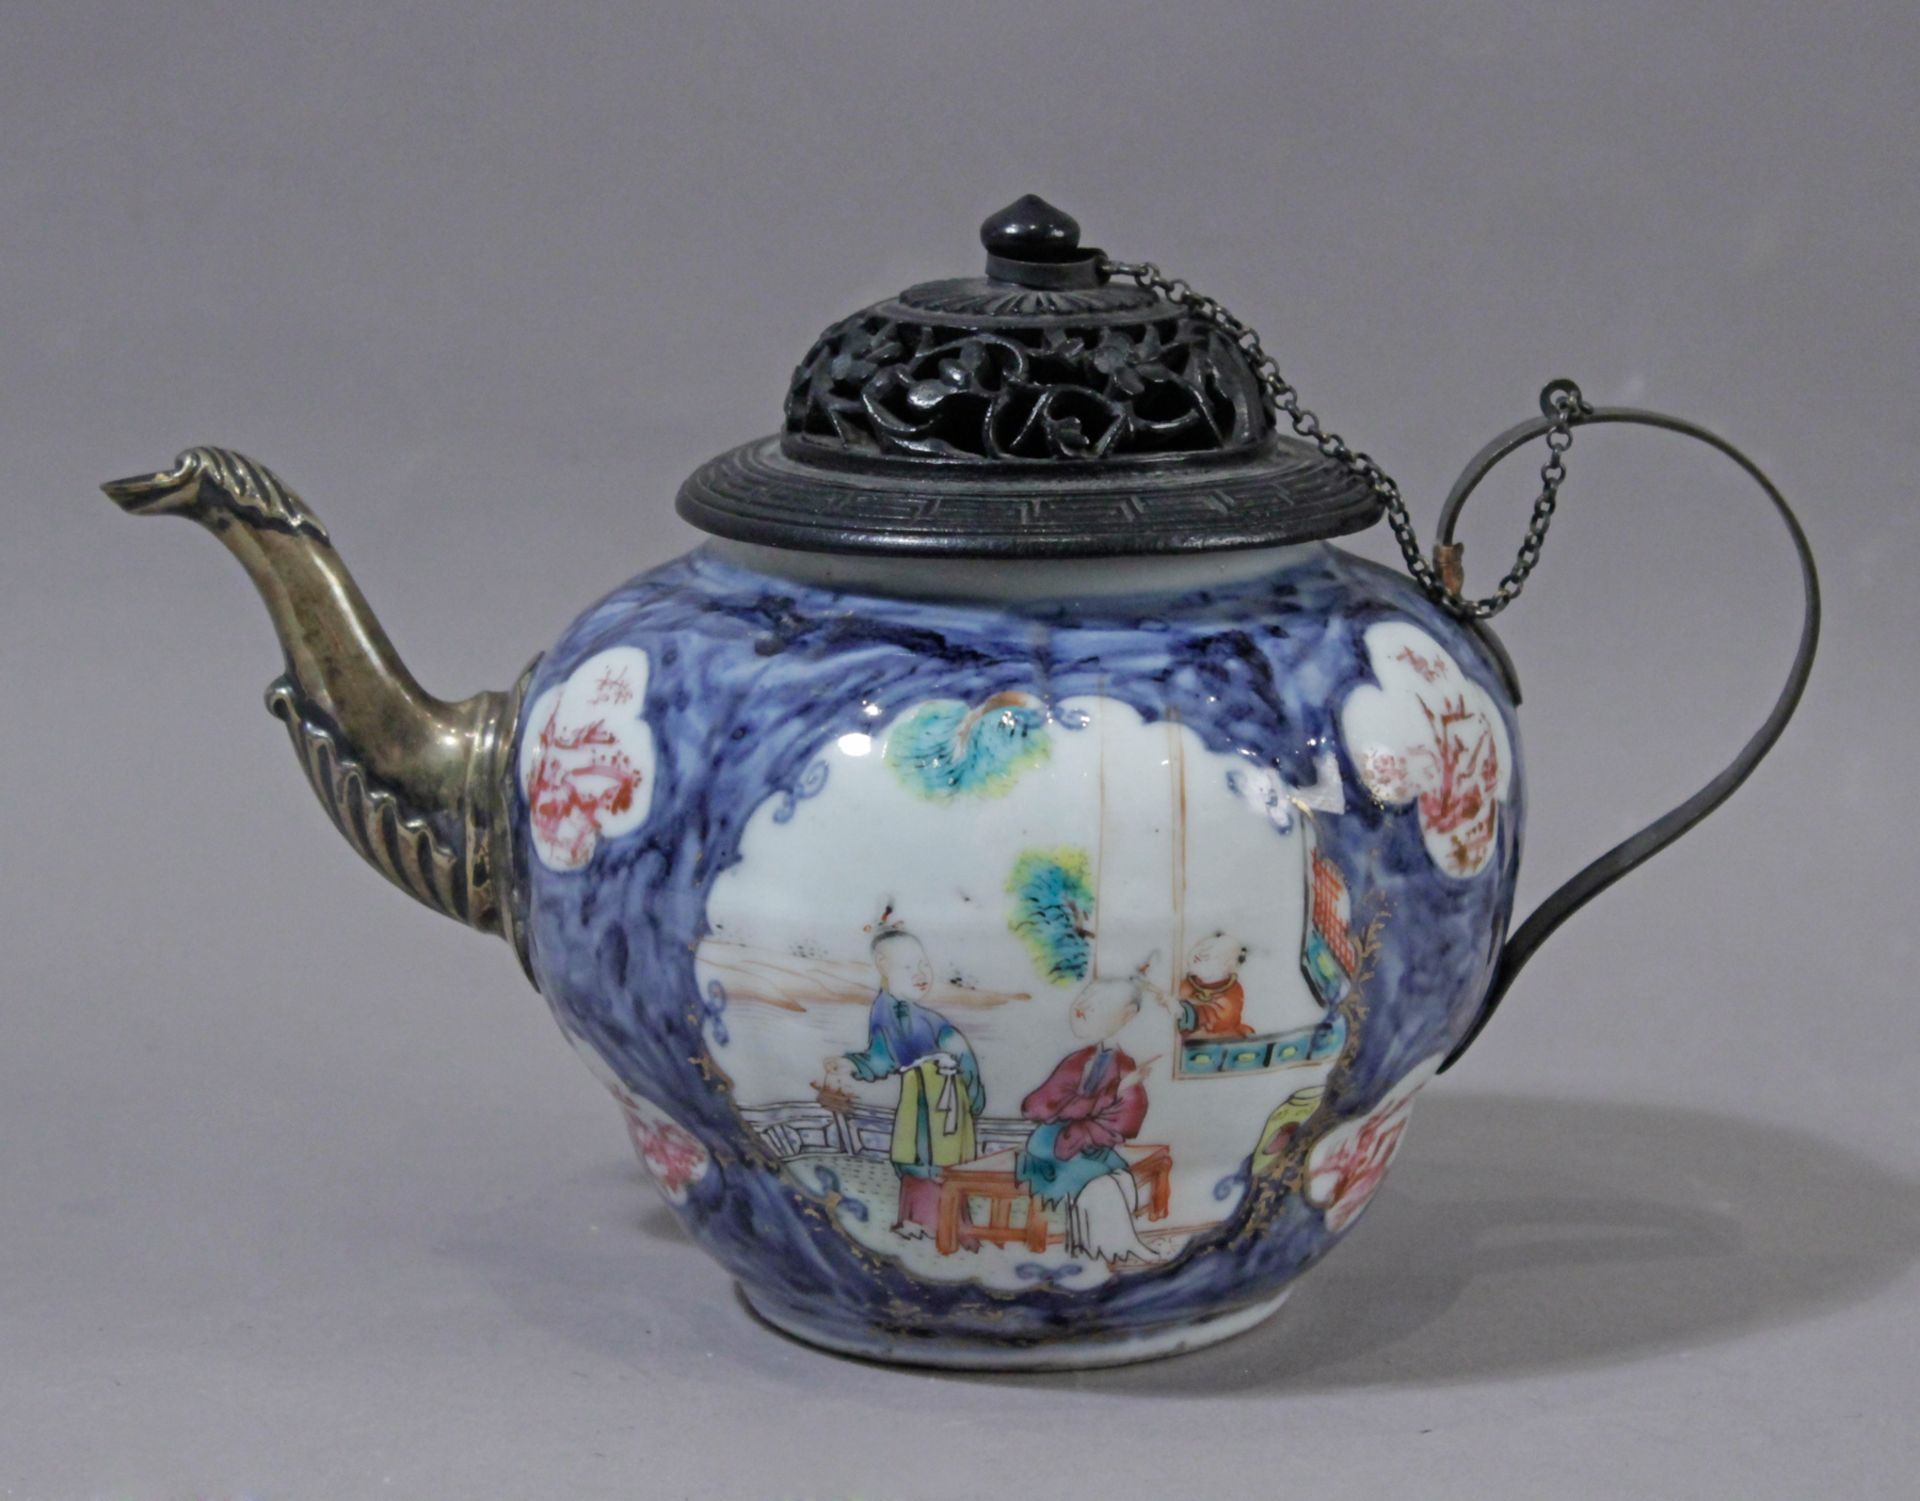 An 18th century Chinese porcelain teapot from Qing dynasty